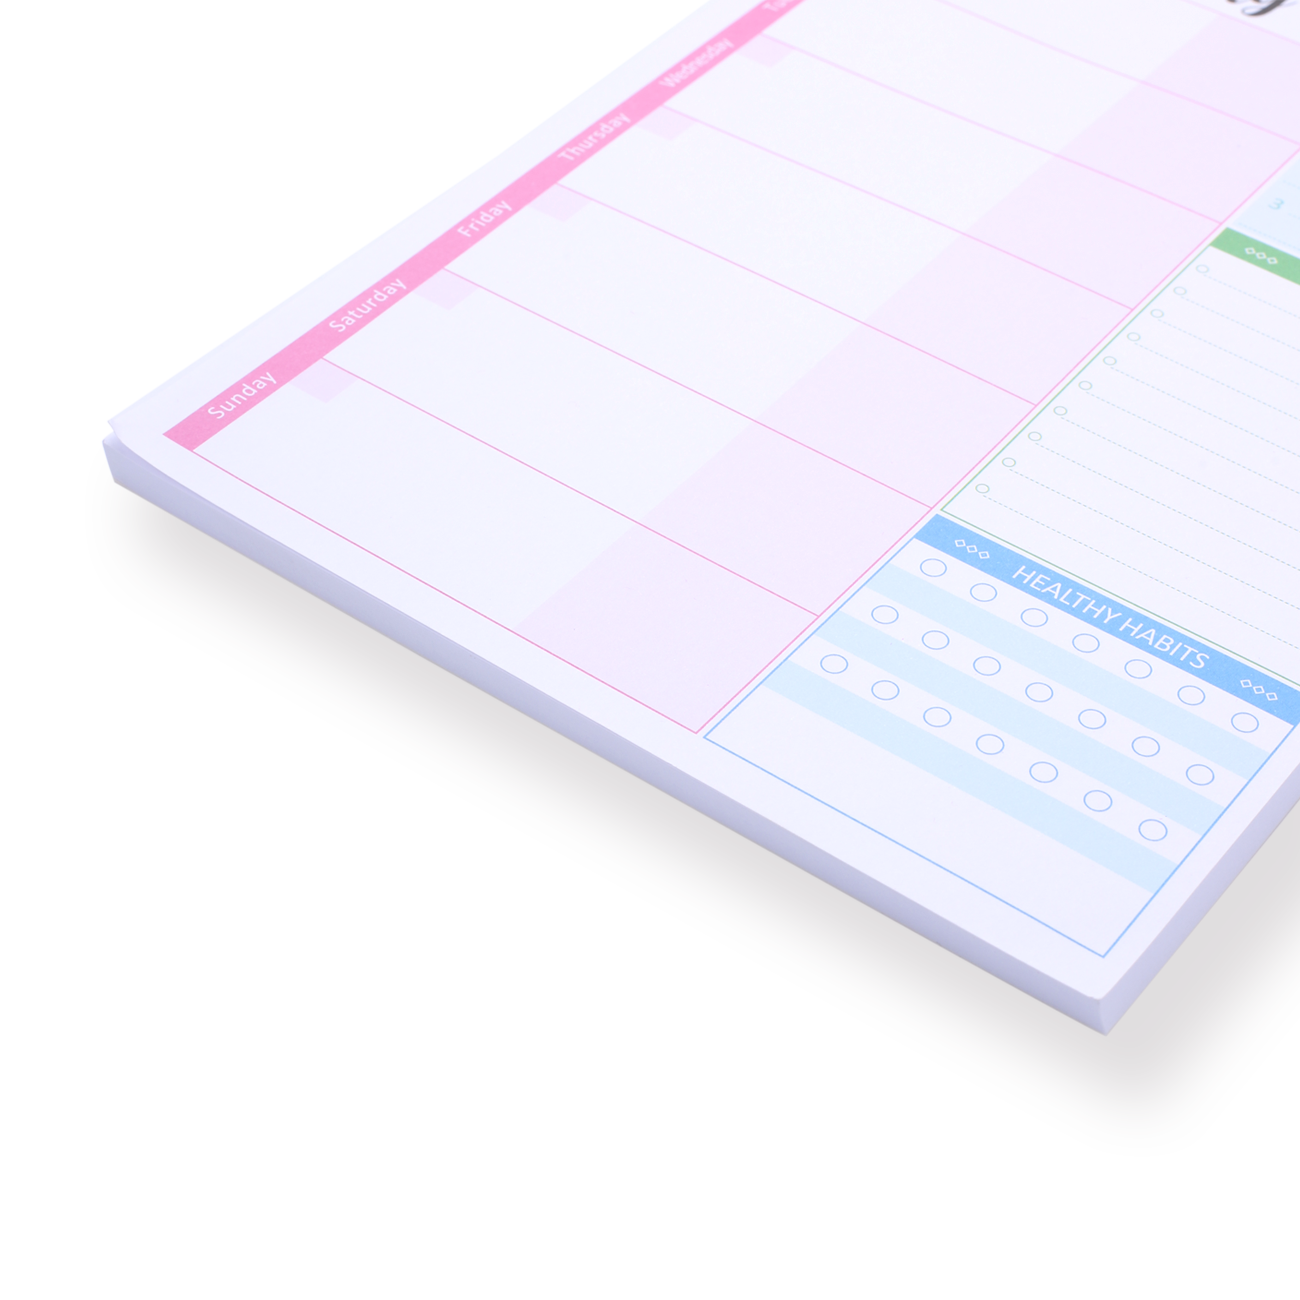 Weekly Planner Notepad - B - Stationery Pal